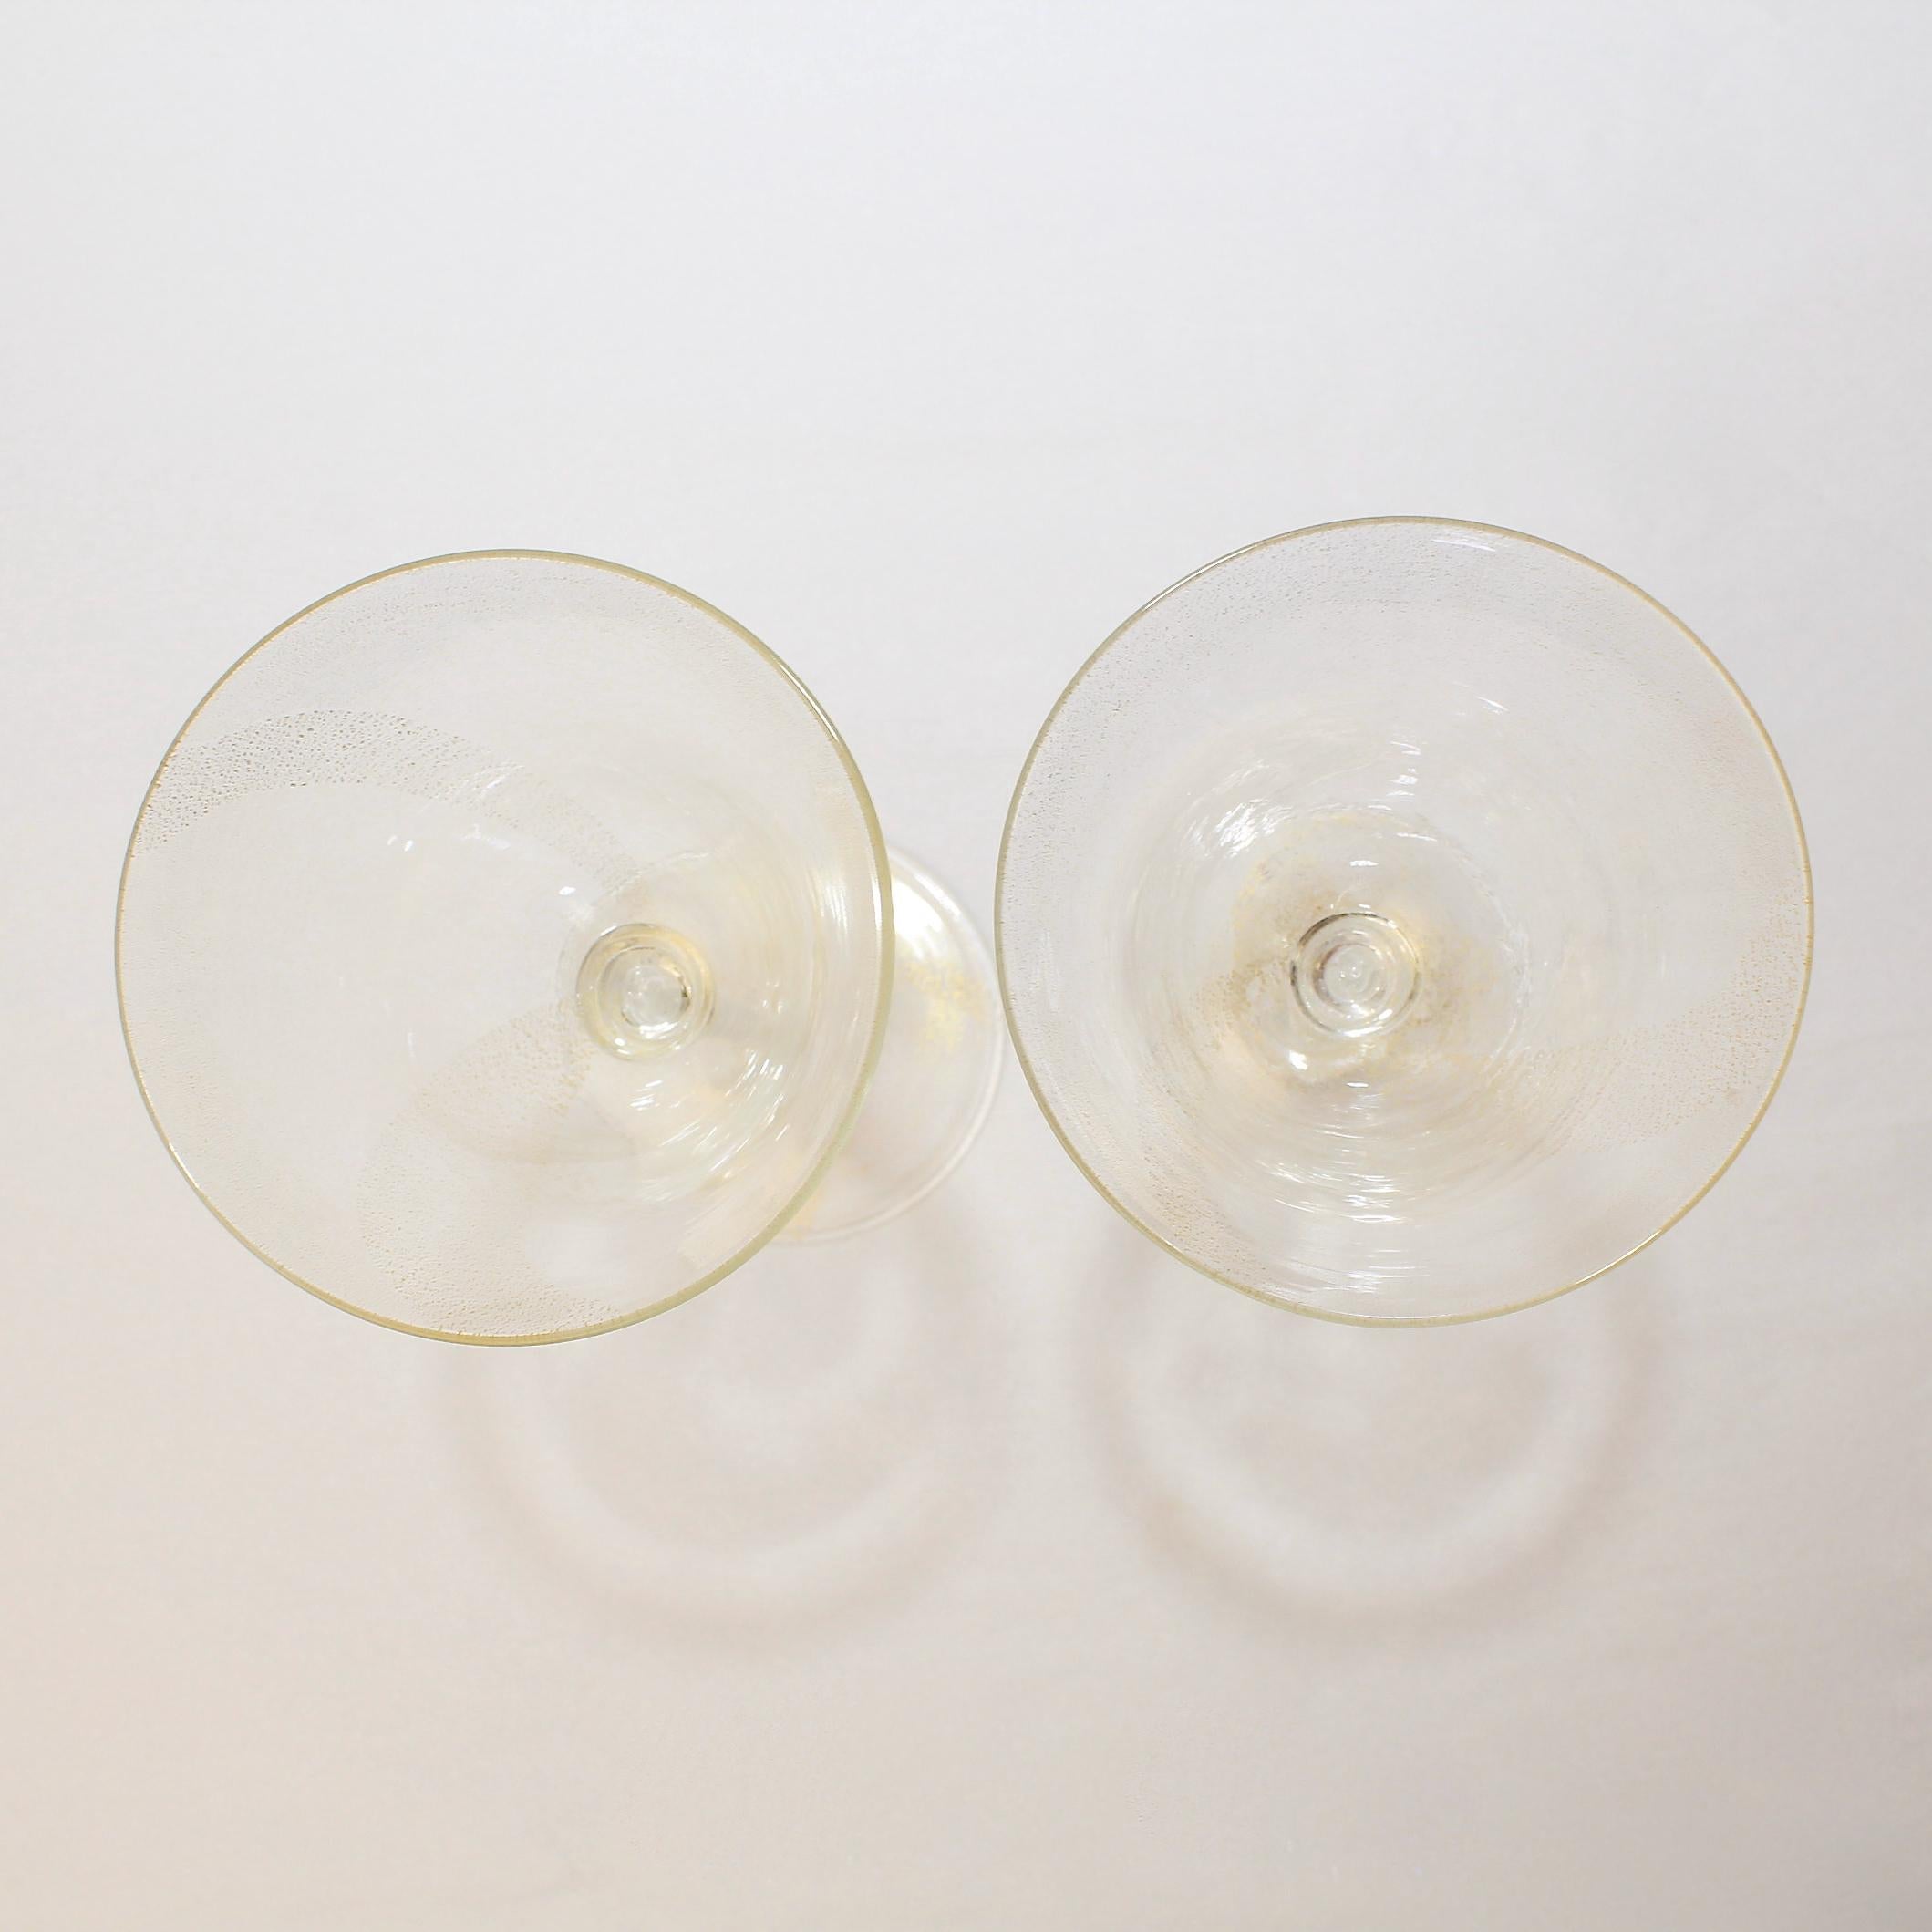 20th Century Pair of Venetian Glass Wine Goblets with White Twist Stems and Gold Inclusions